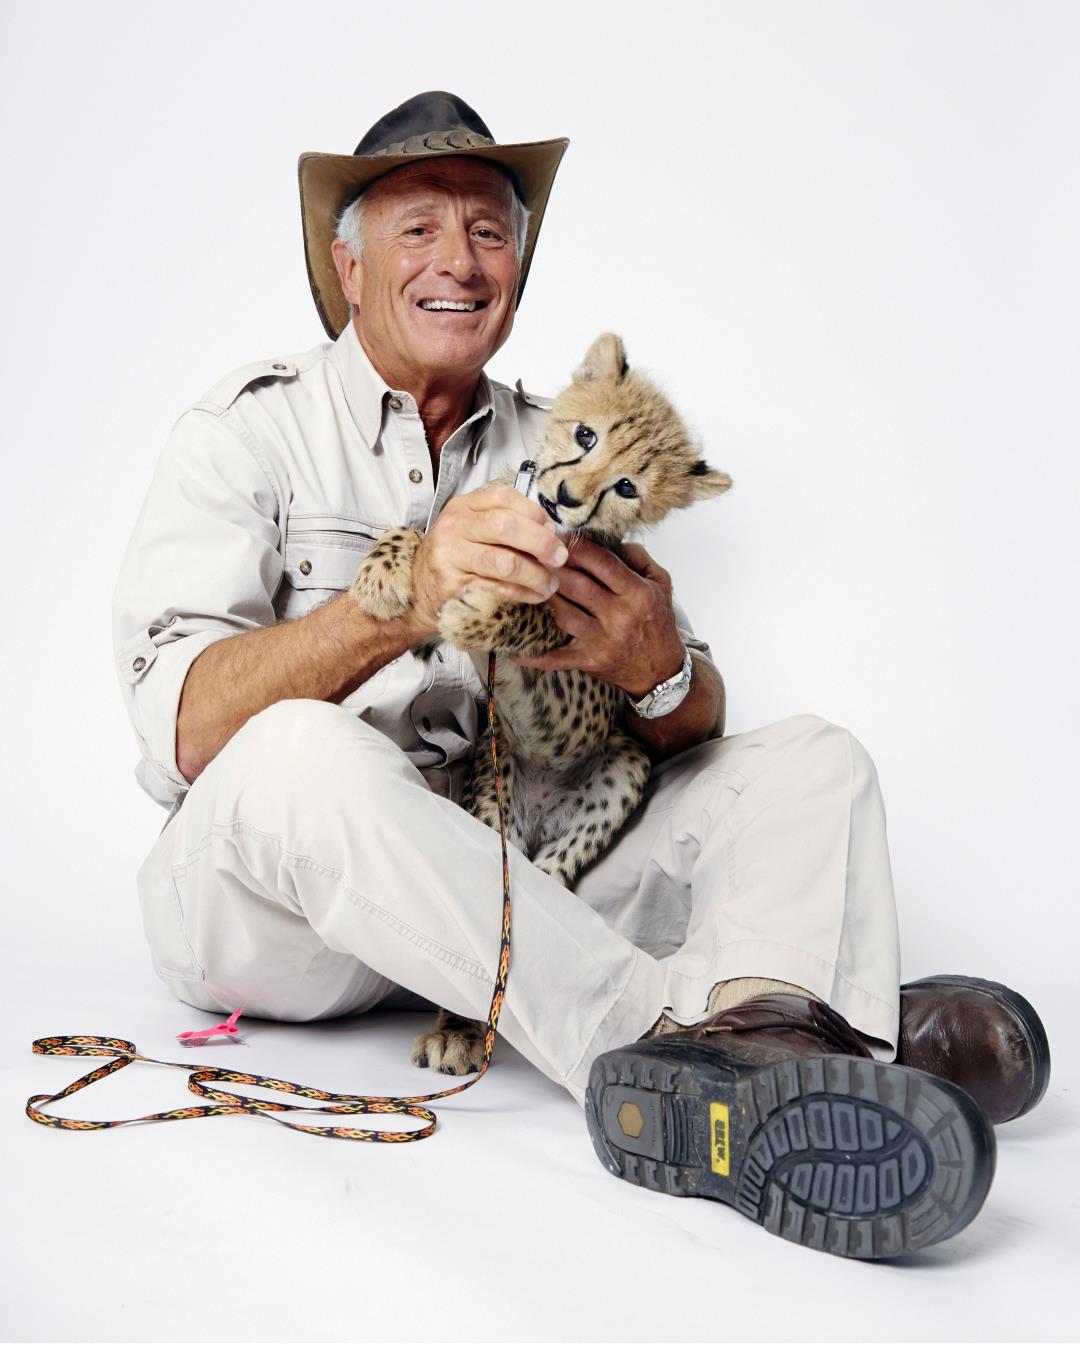 Jack Hanna To Retire After Diagnosis